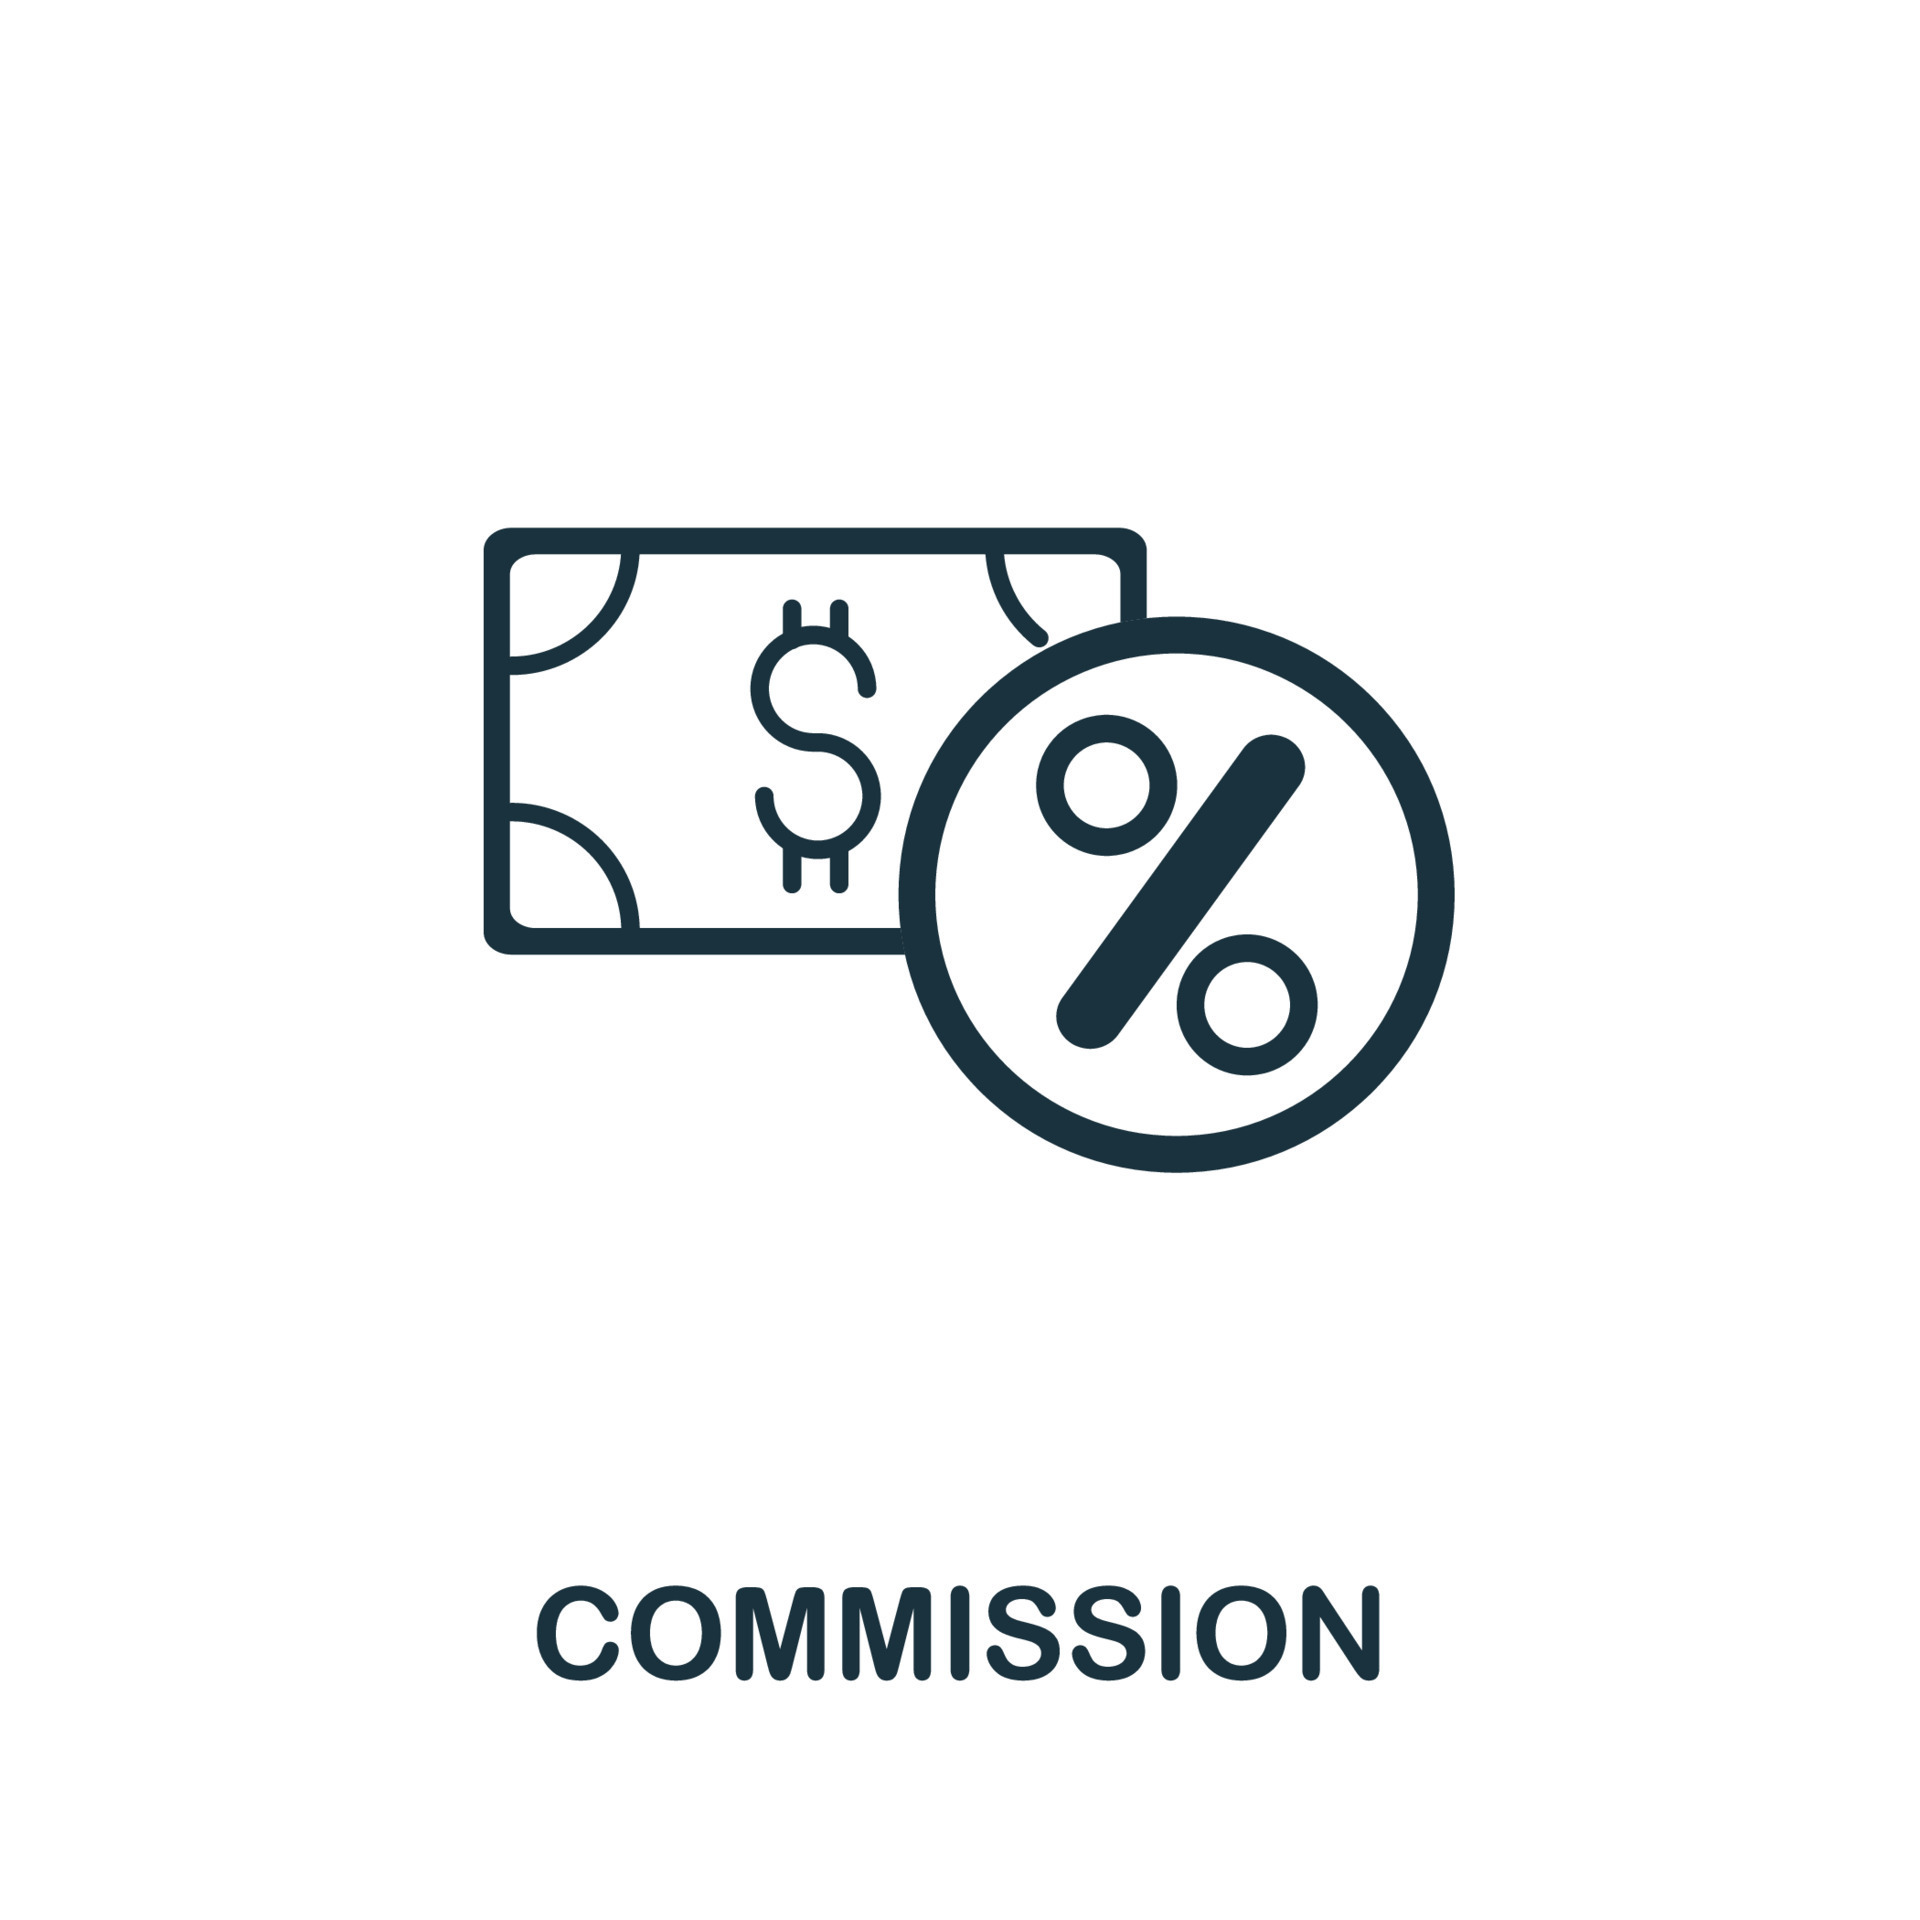 Commission fees paid for successful bookings only